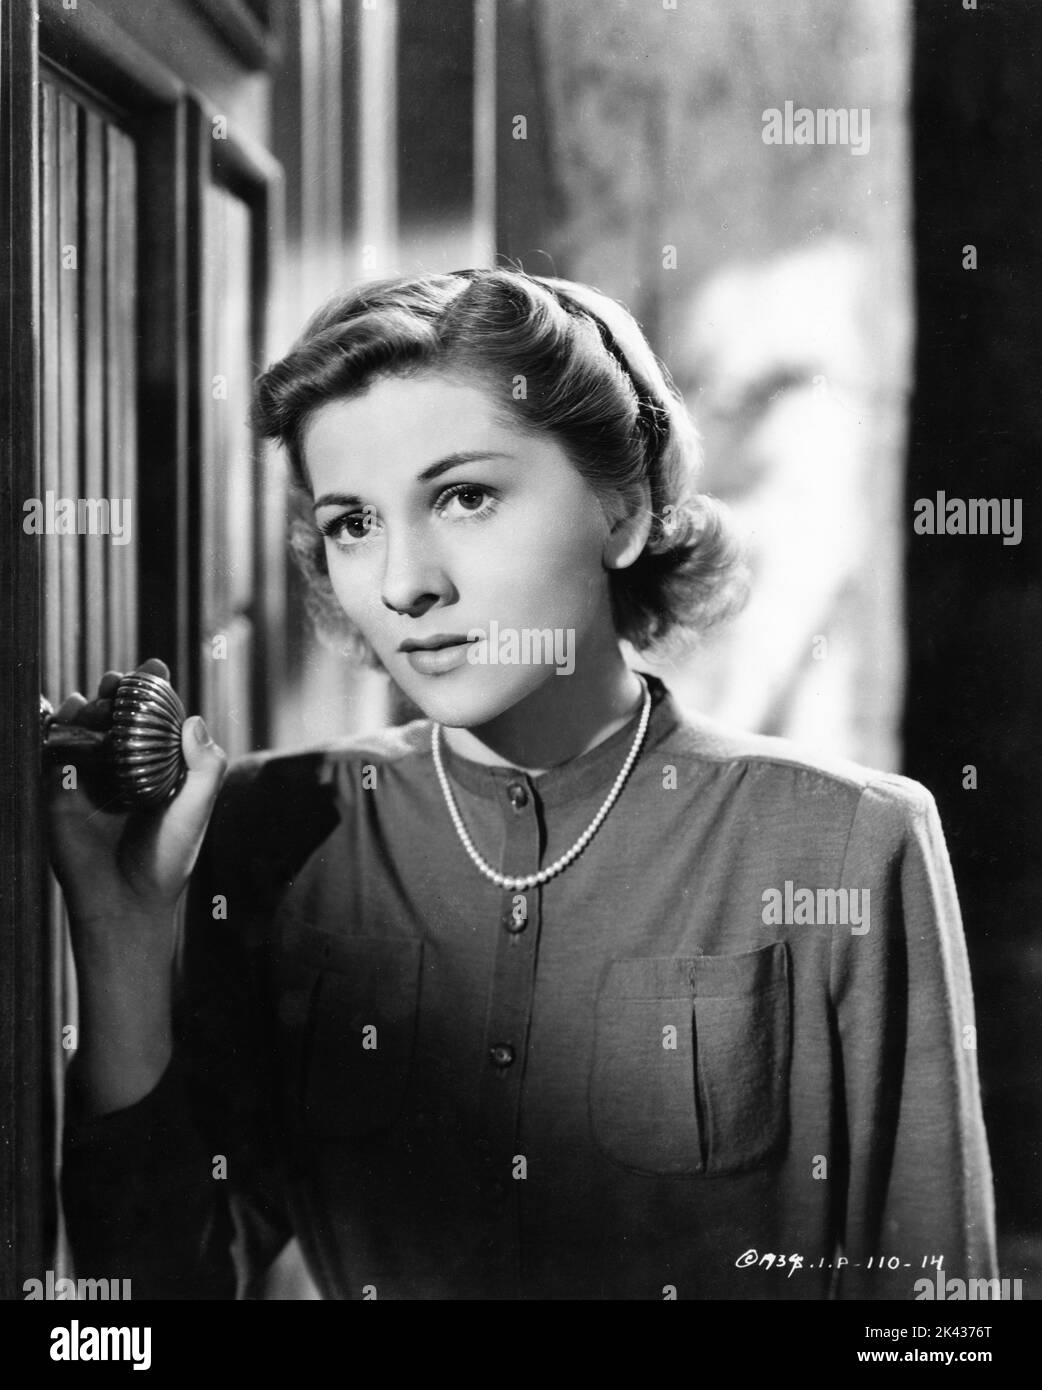 JOAN FONTAINE as the second Mrs. de Winter in REBECCA 1940 director ALFRED HITCHCOCK novel Daphne Du Maurier producer David O. Selznick Selznick International Pictures / United Artists Stock Photo